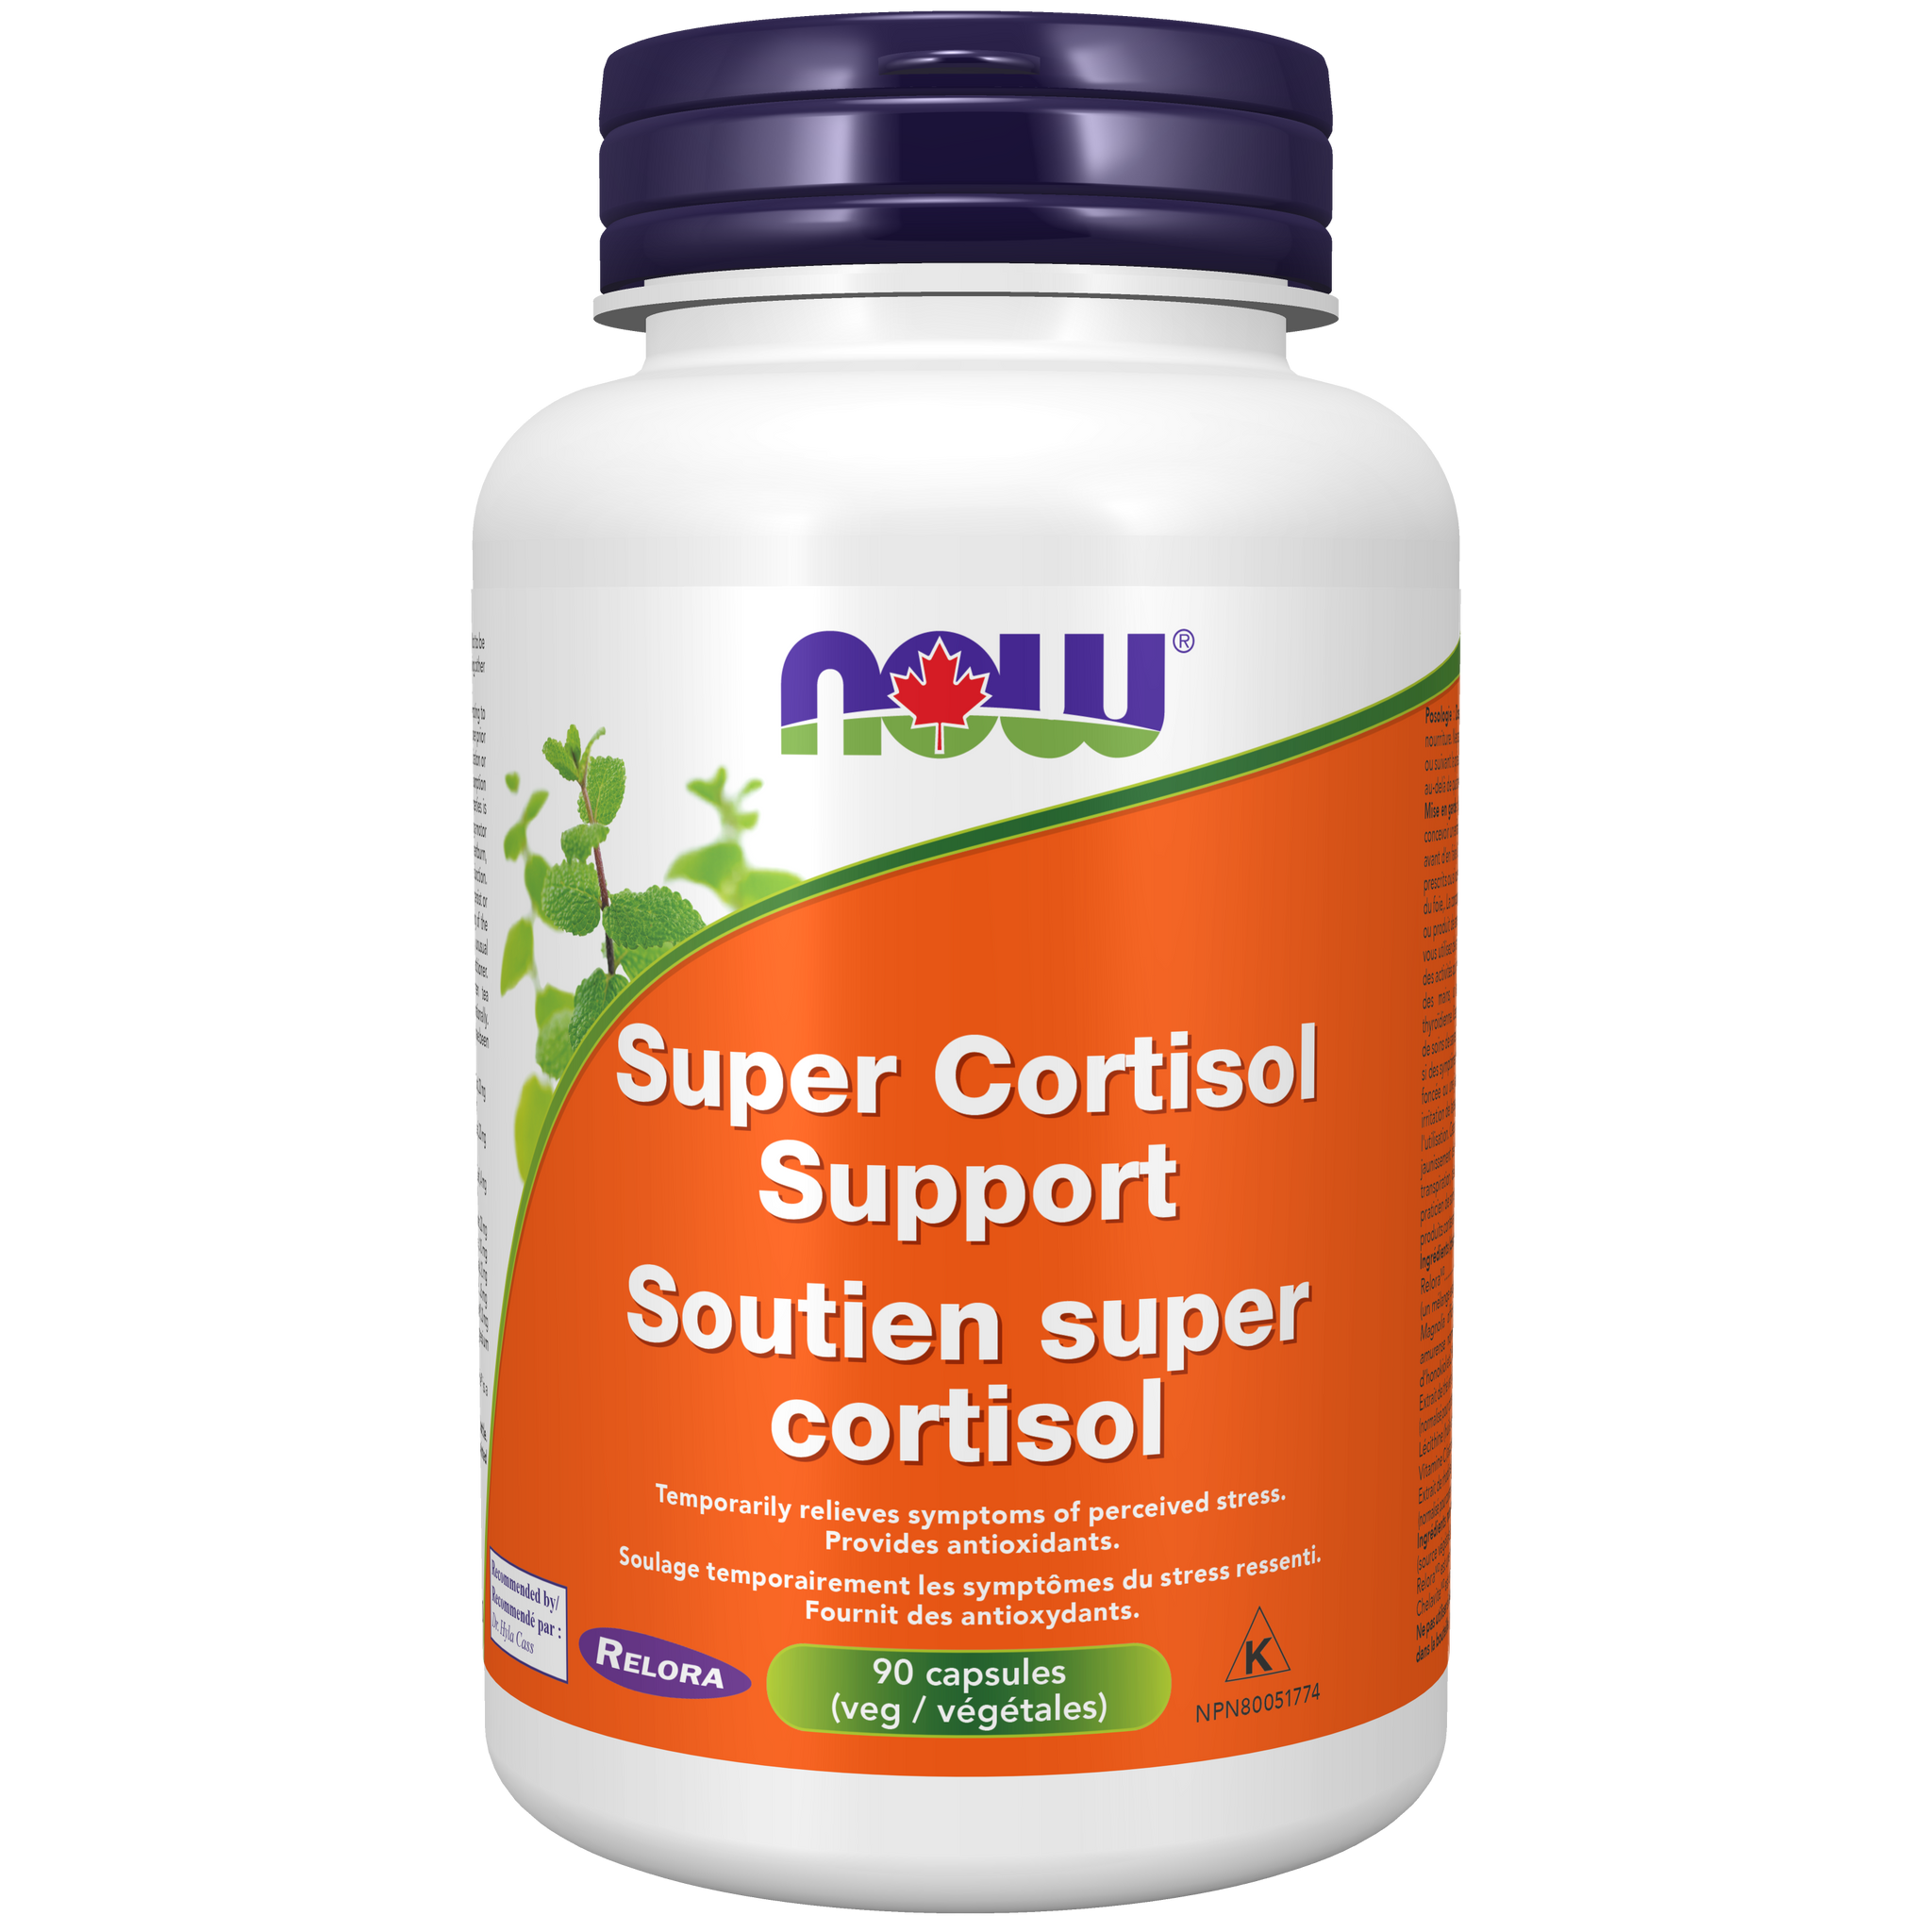 NOW Super Cortisol Support